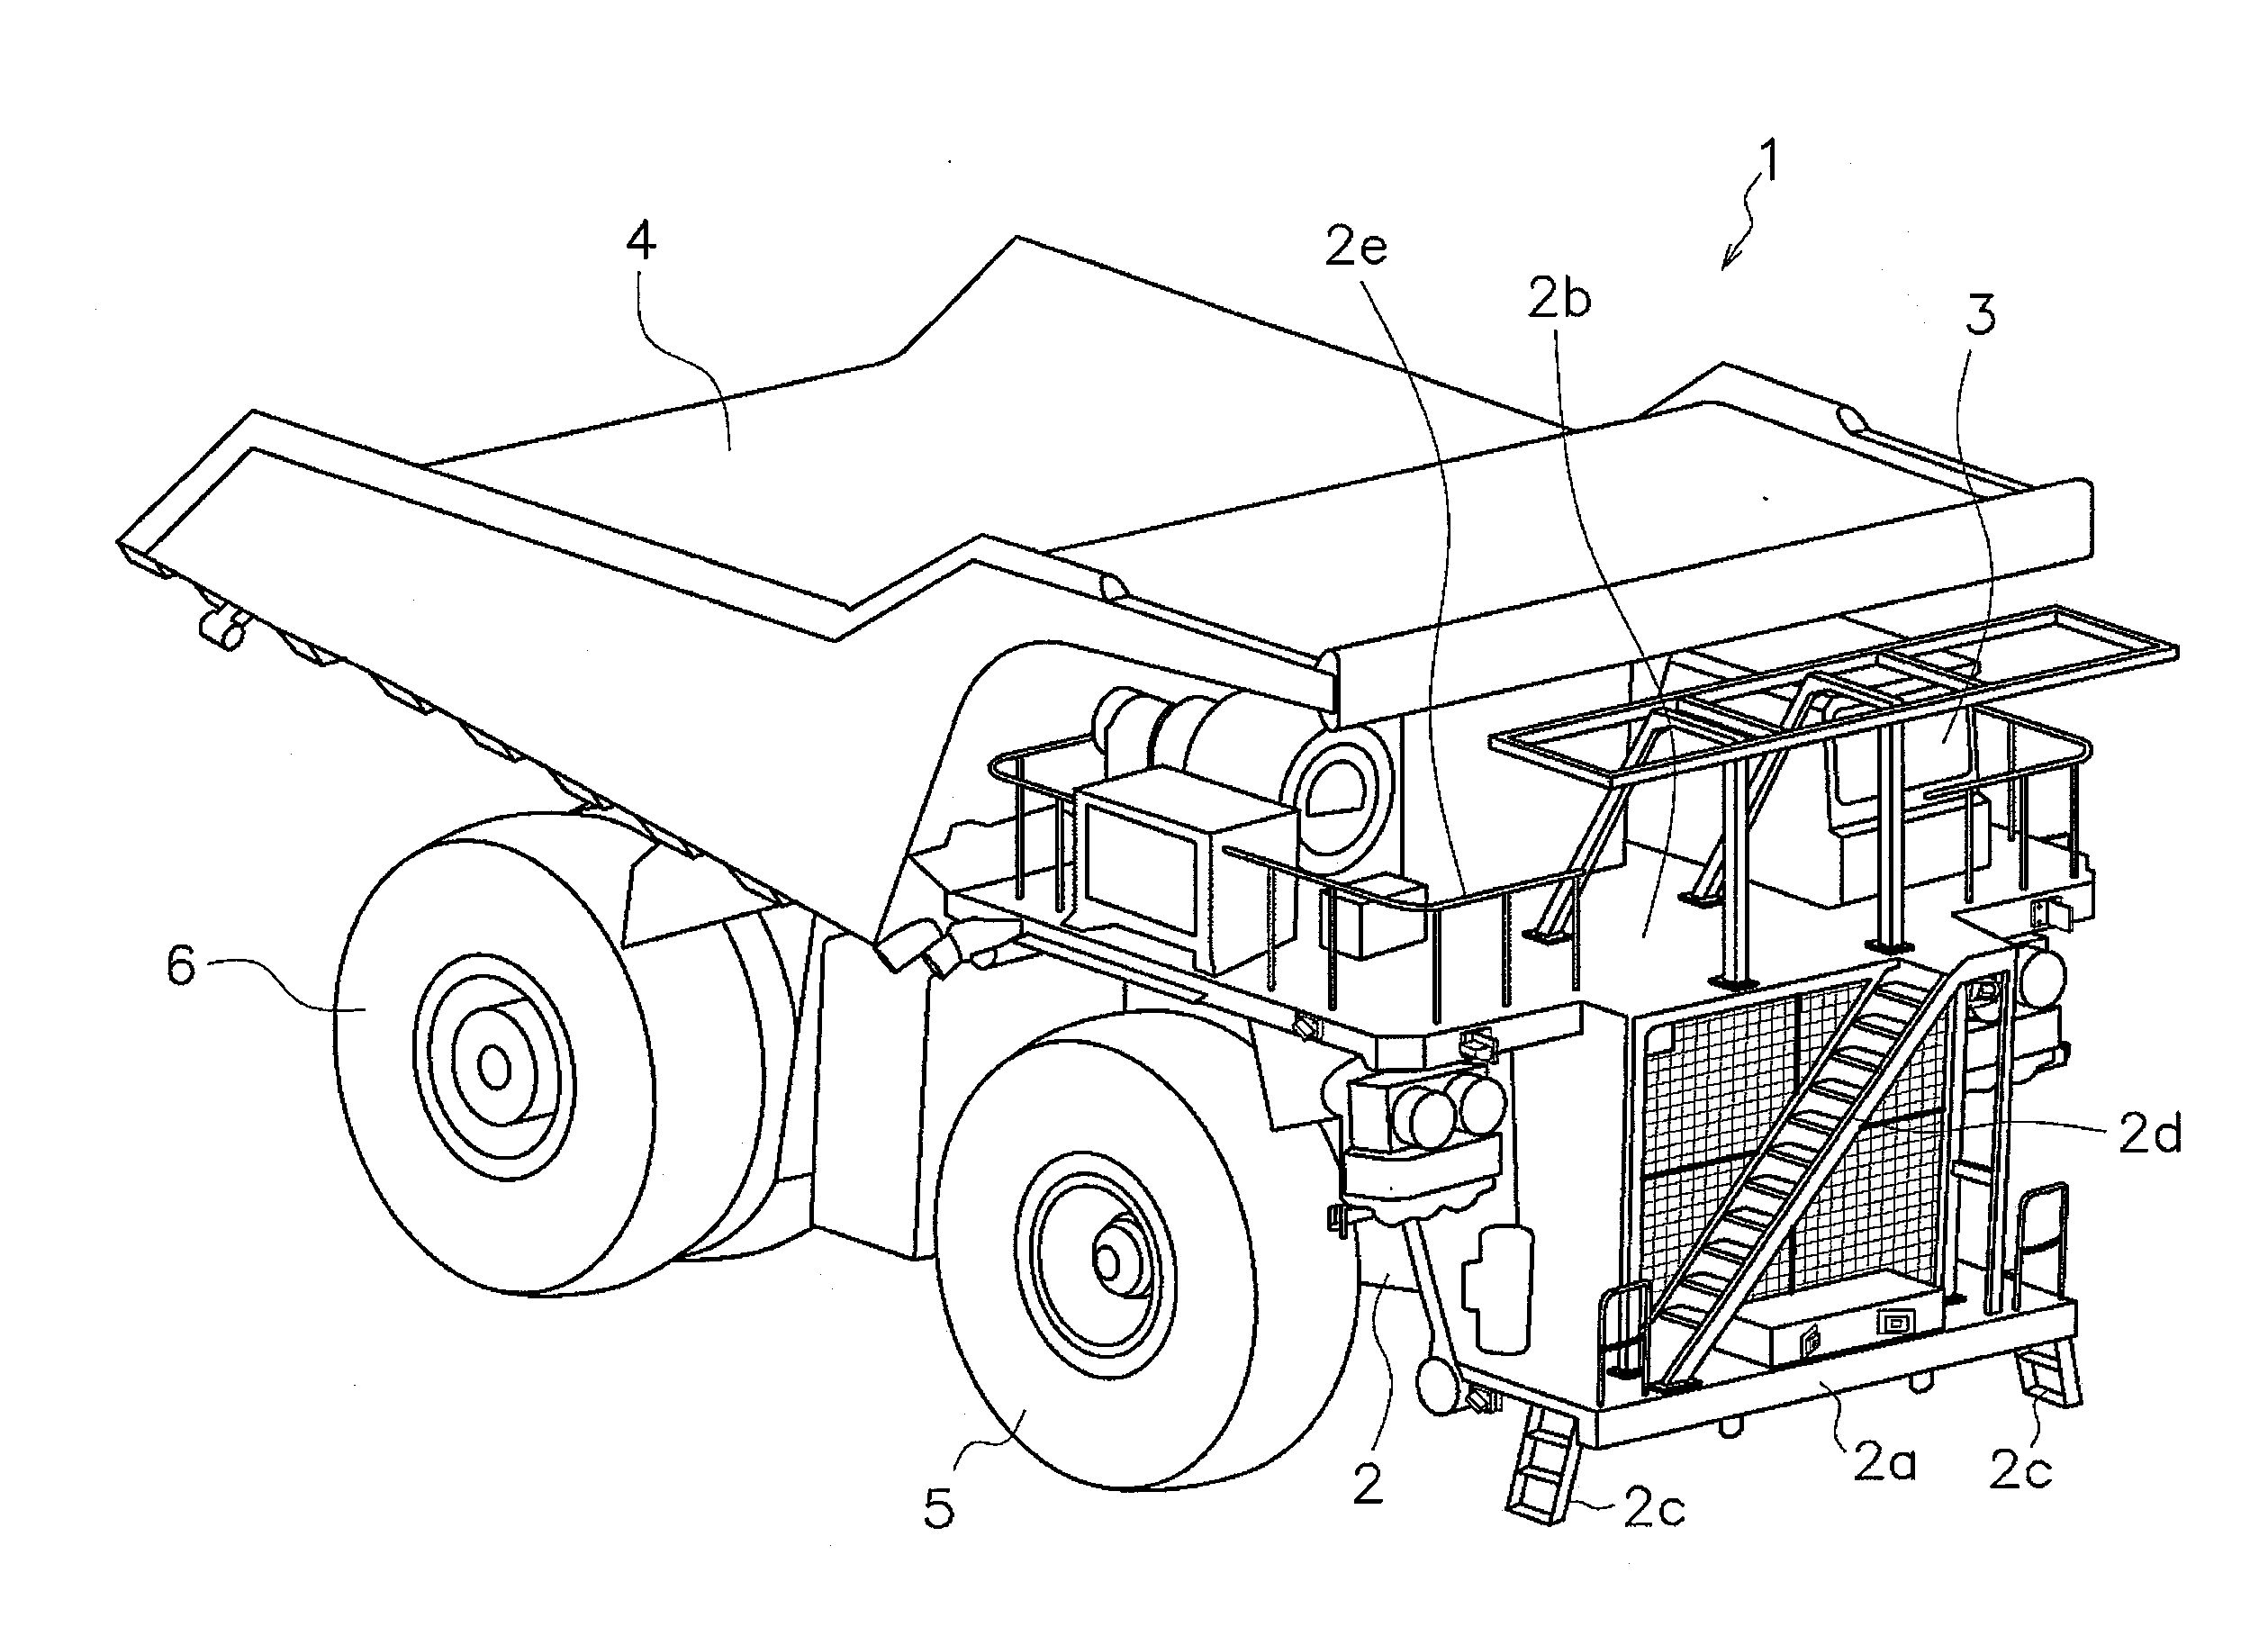 SURROUNDING AREA MONITORING DEVICE FOR WORK VEHICLE (as amended)